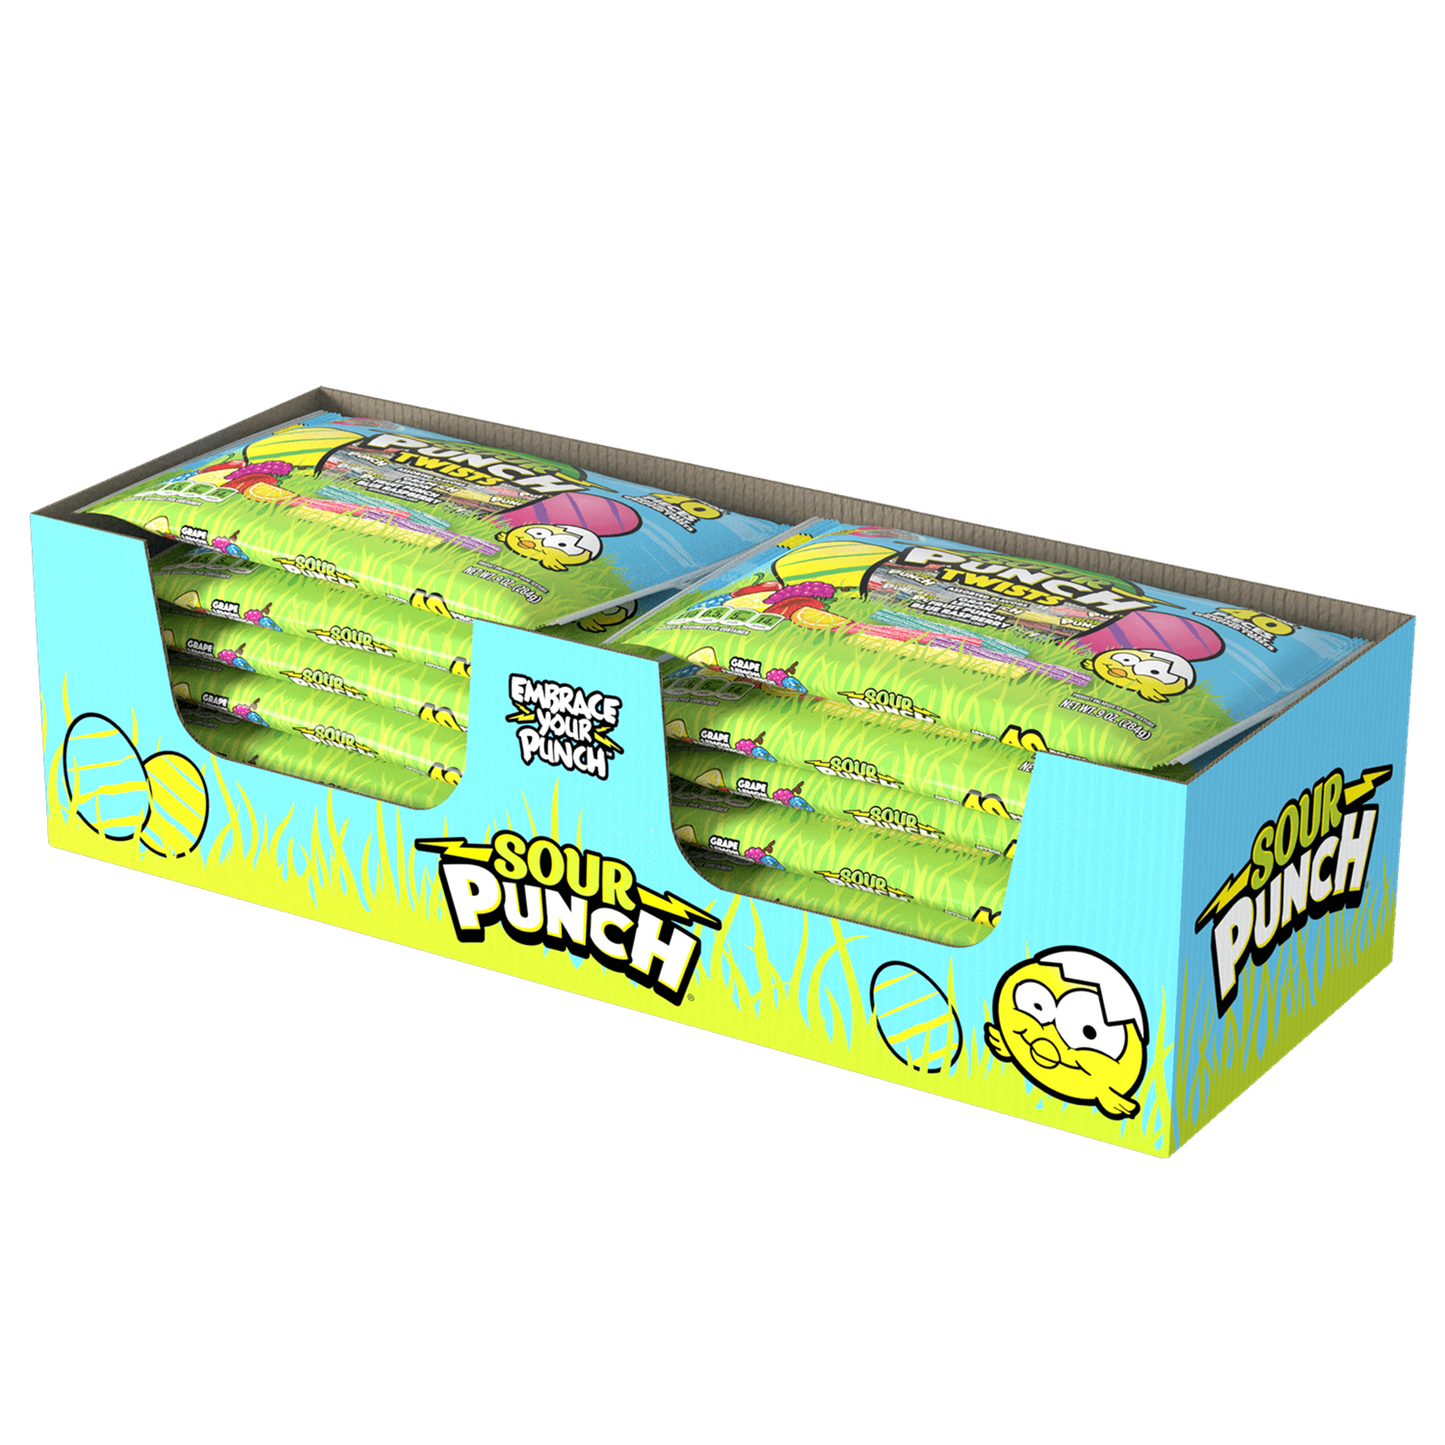 SOUR PUNCH Individually Wrapped Easter Twists 12-pack of 9oz bags